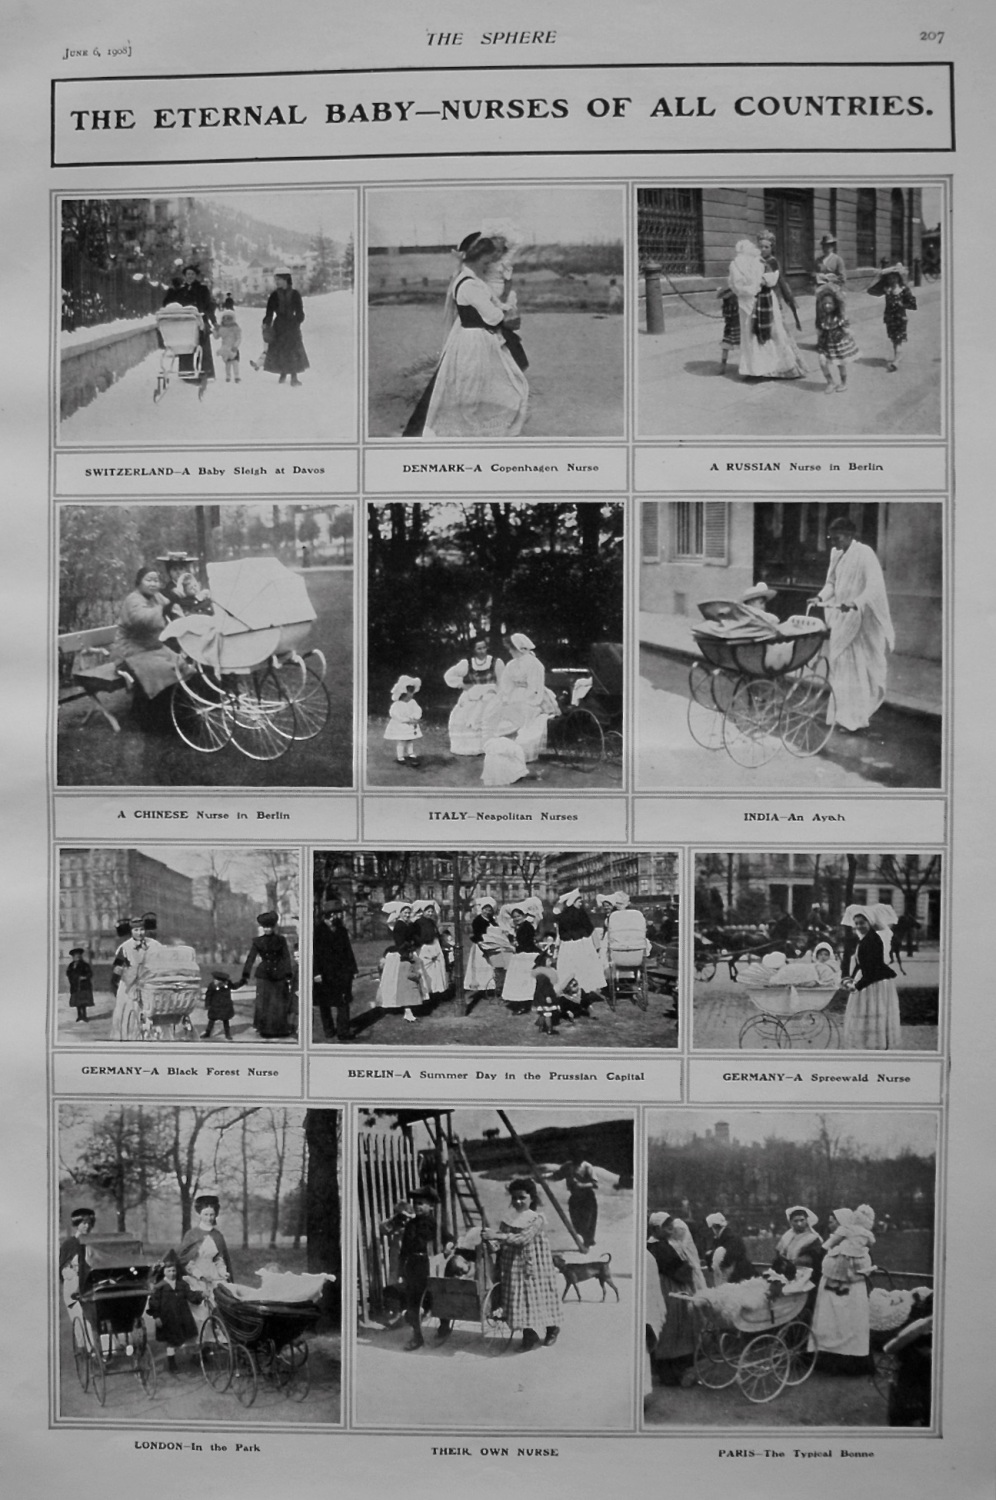 The Eternal Baby-Nurses of all Countries. 1908